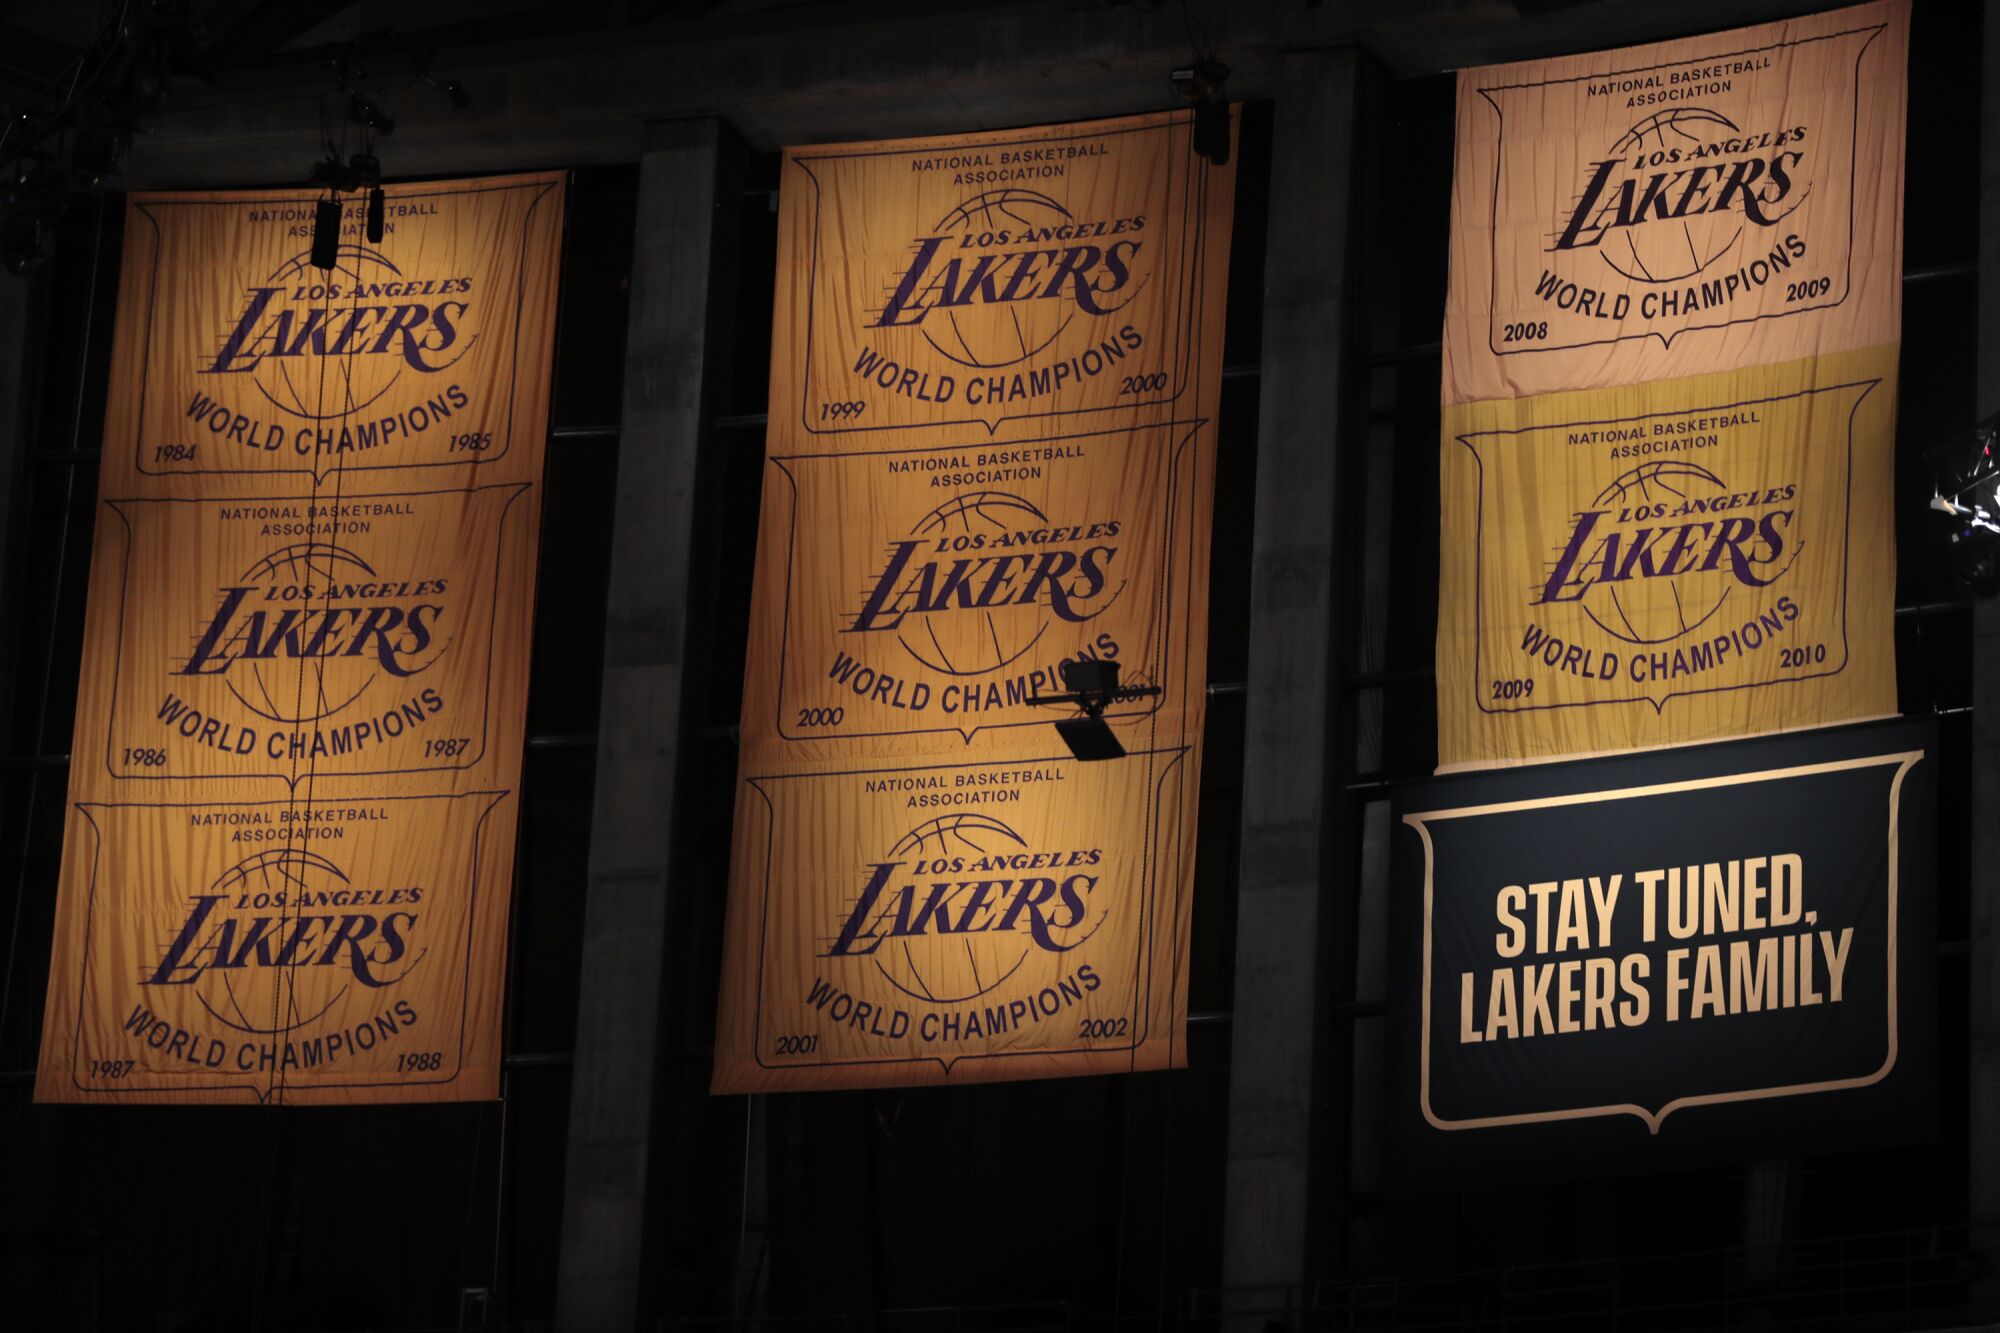 A banner telling Lakers fans to "stay tuned" hangs as a placeholder for the team's 2020 championship.